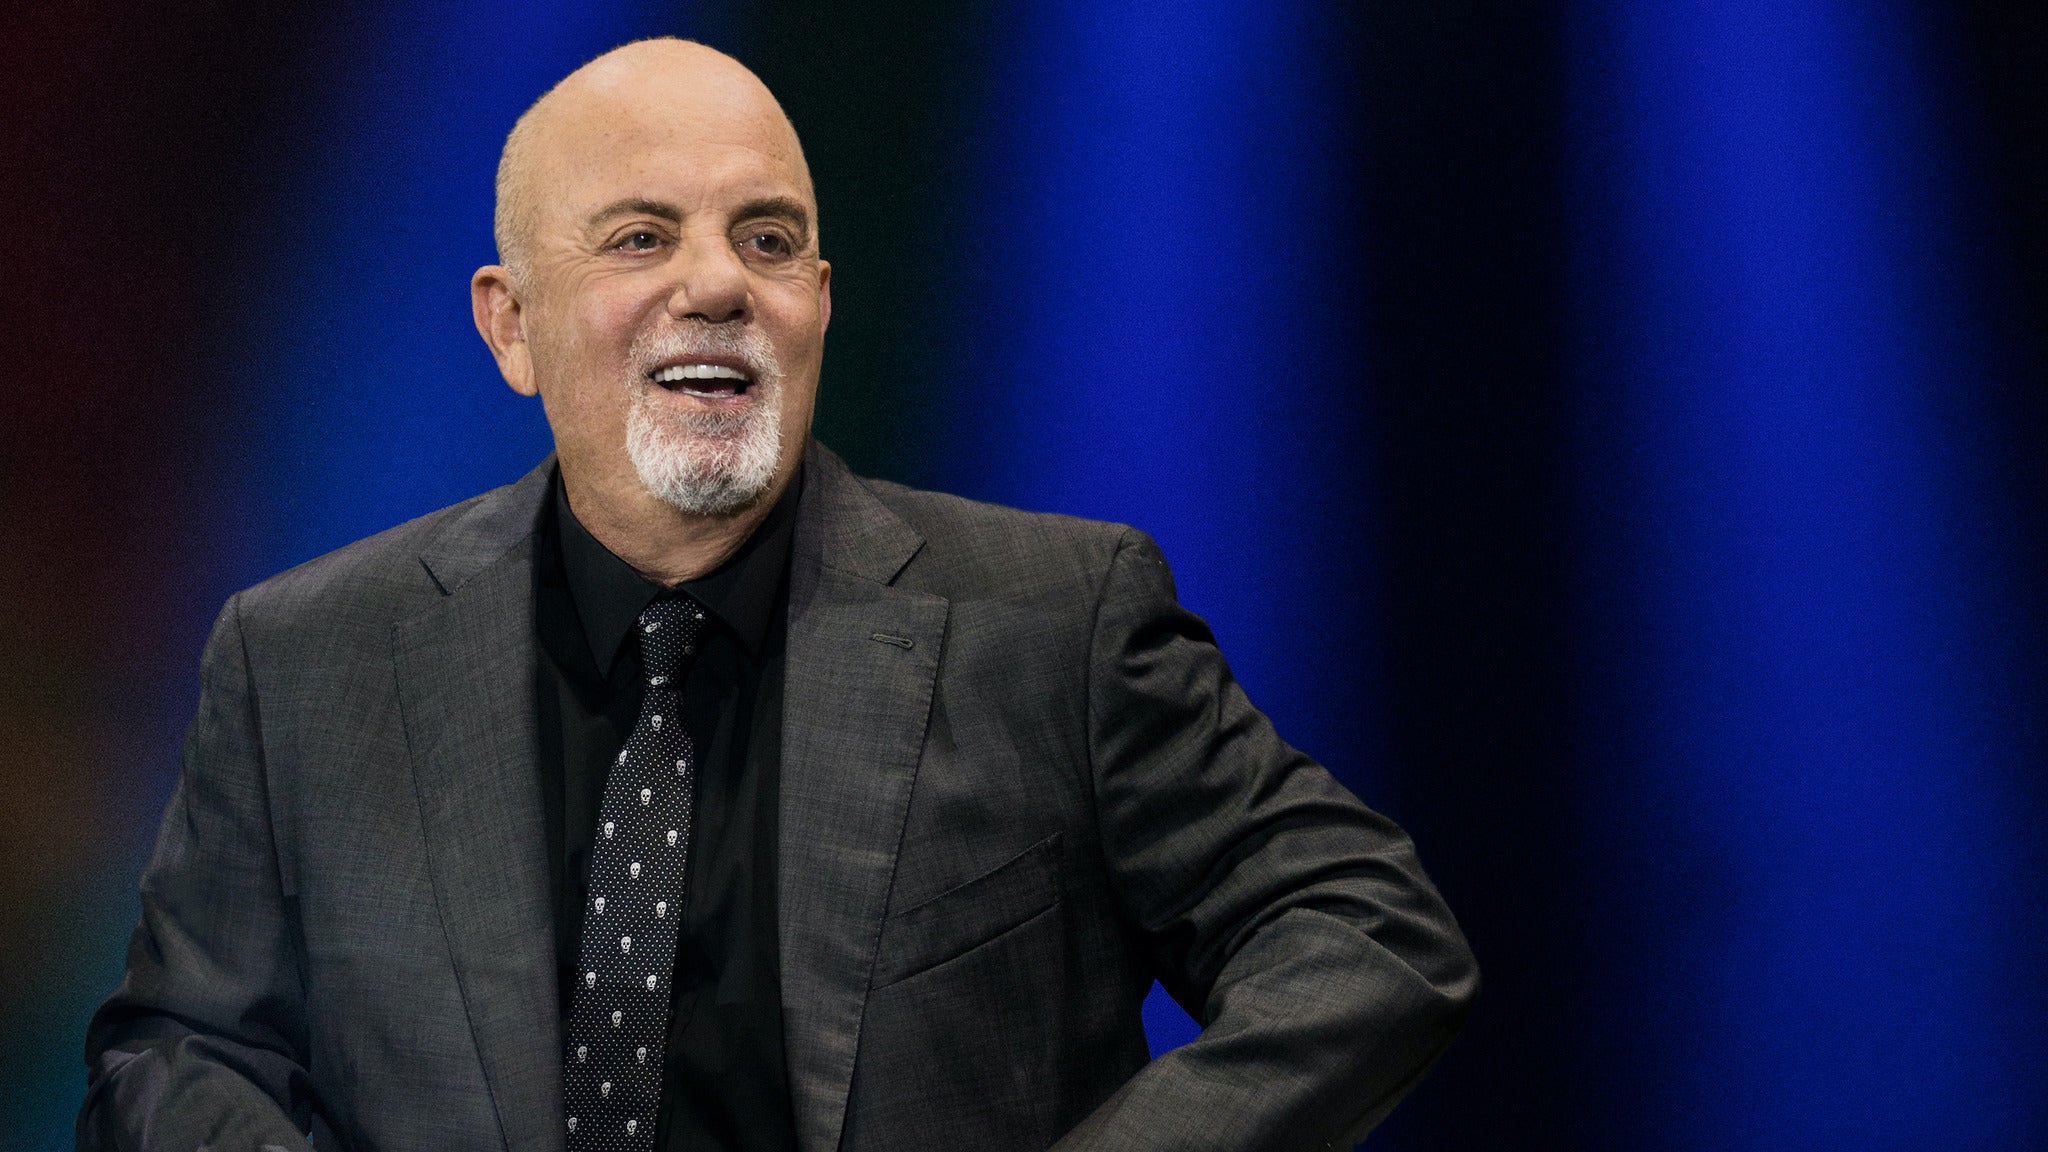 Billy Joel - In Concert presale code for show tickets in New York, NY (Madison Square Garden)